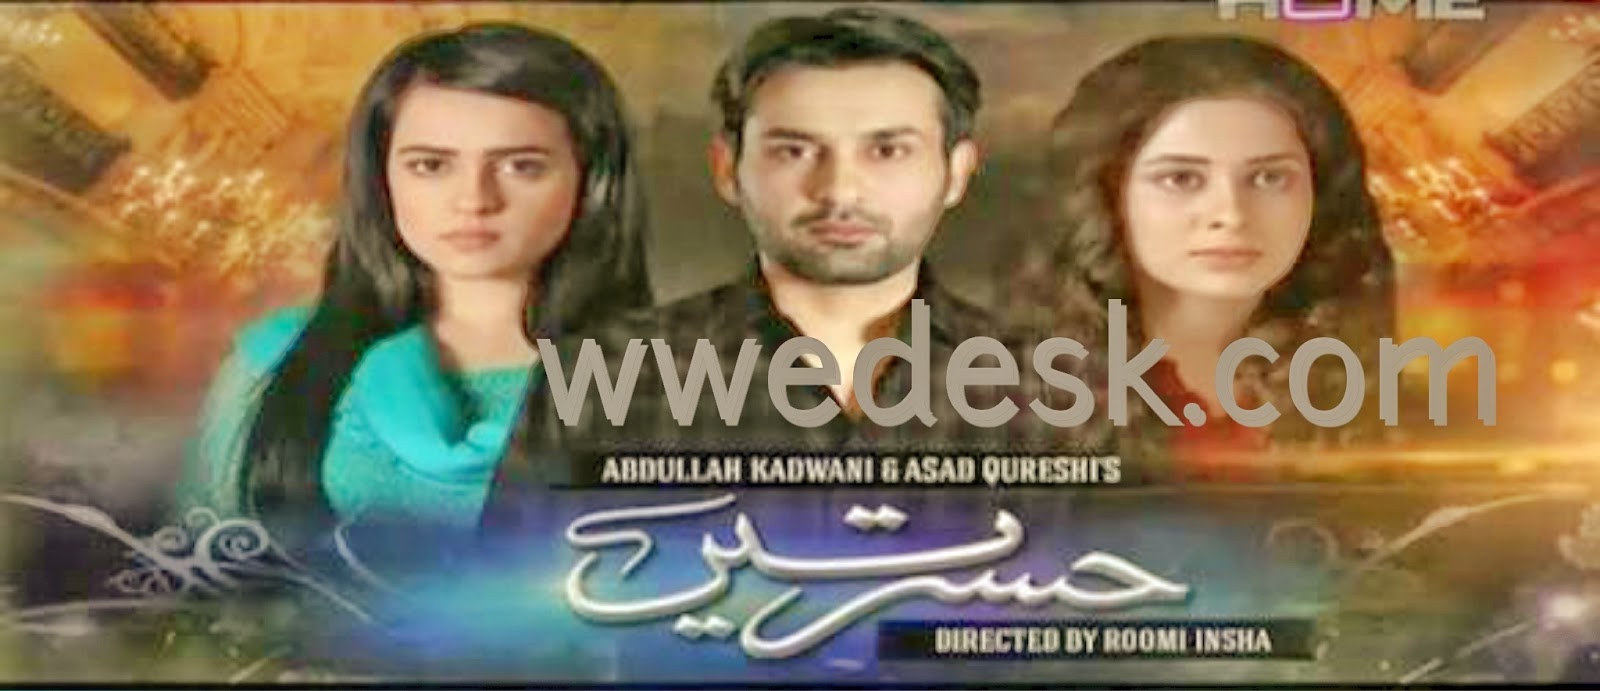 Download song Pakistani Drama Songs Mp3 Ary Digital (56.65 MB) - Free Full Download All Music